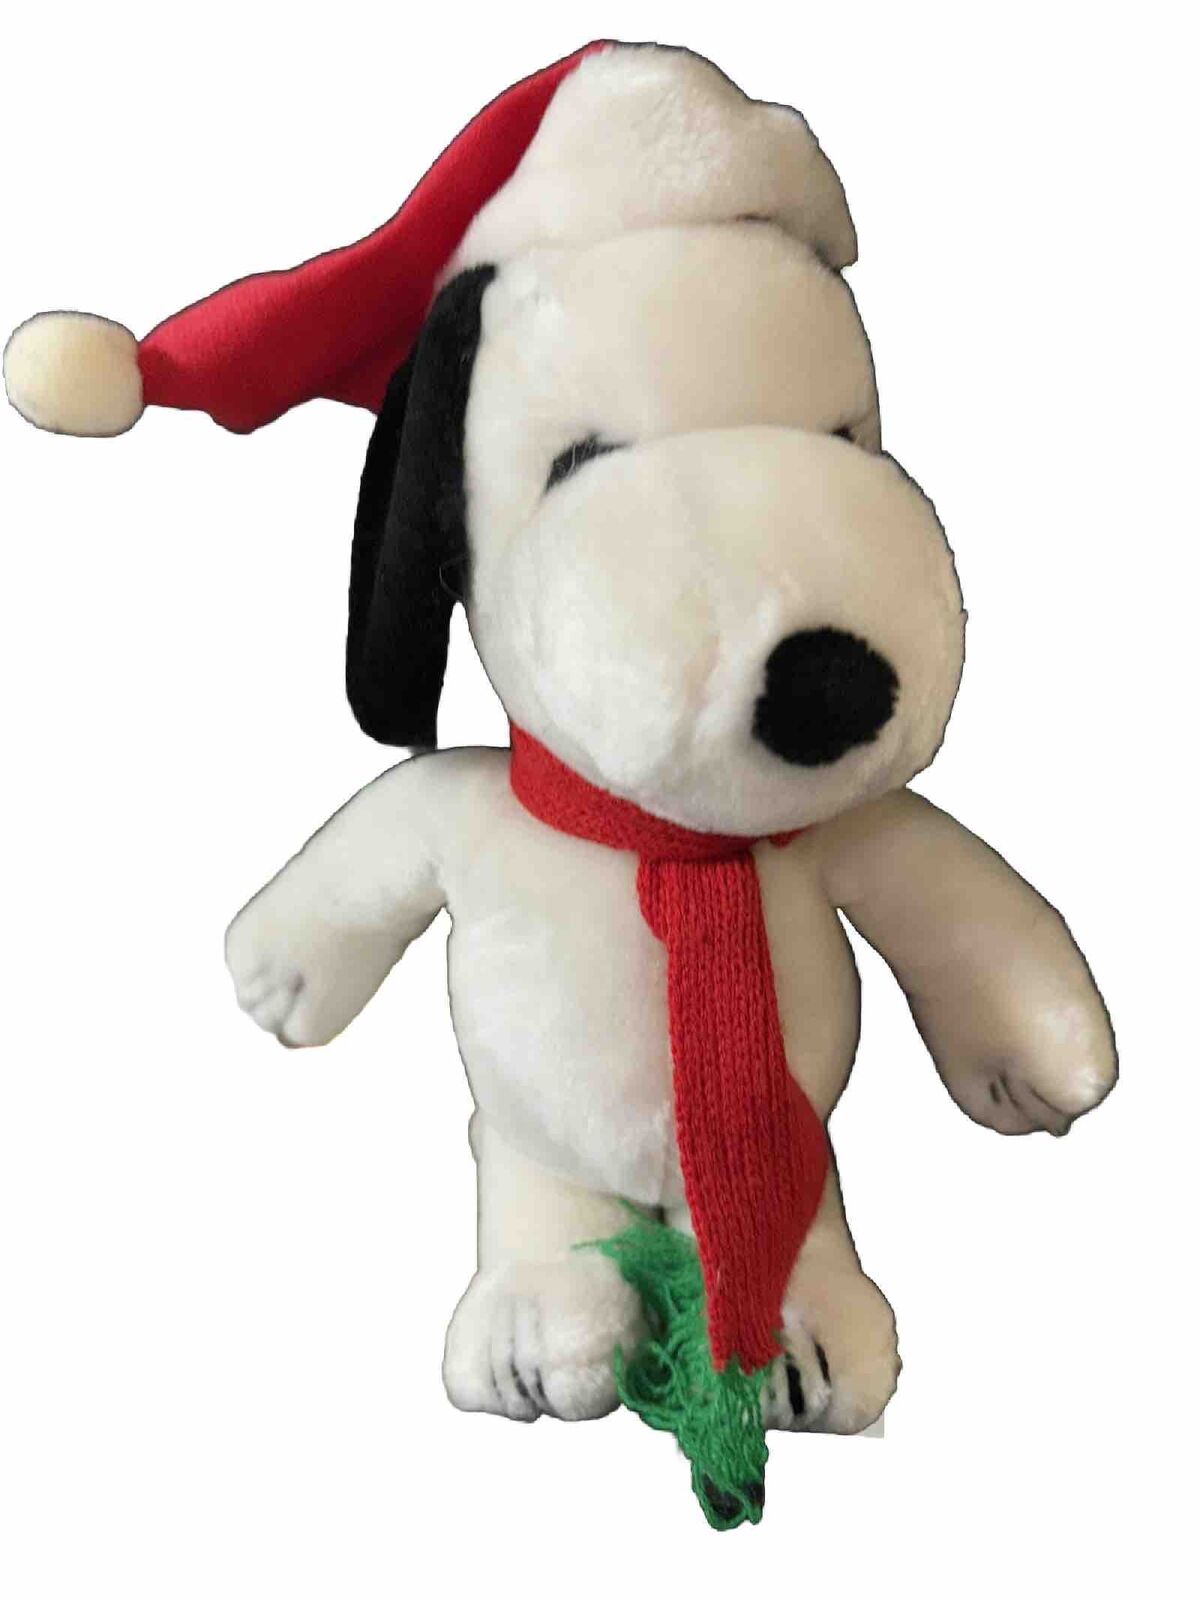 Snoopy Winter Plush Doll 1986 By Applause Item # 21579 Winter Snoopy